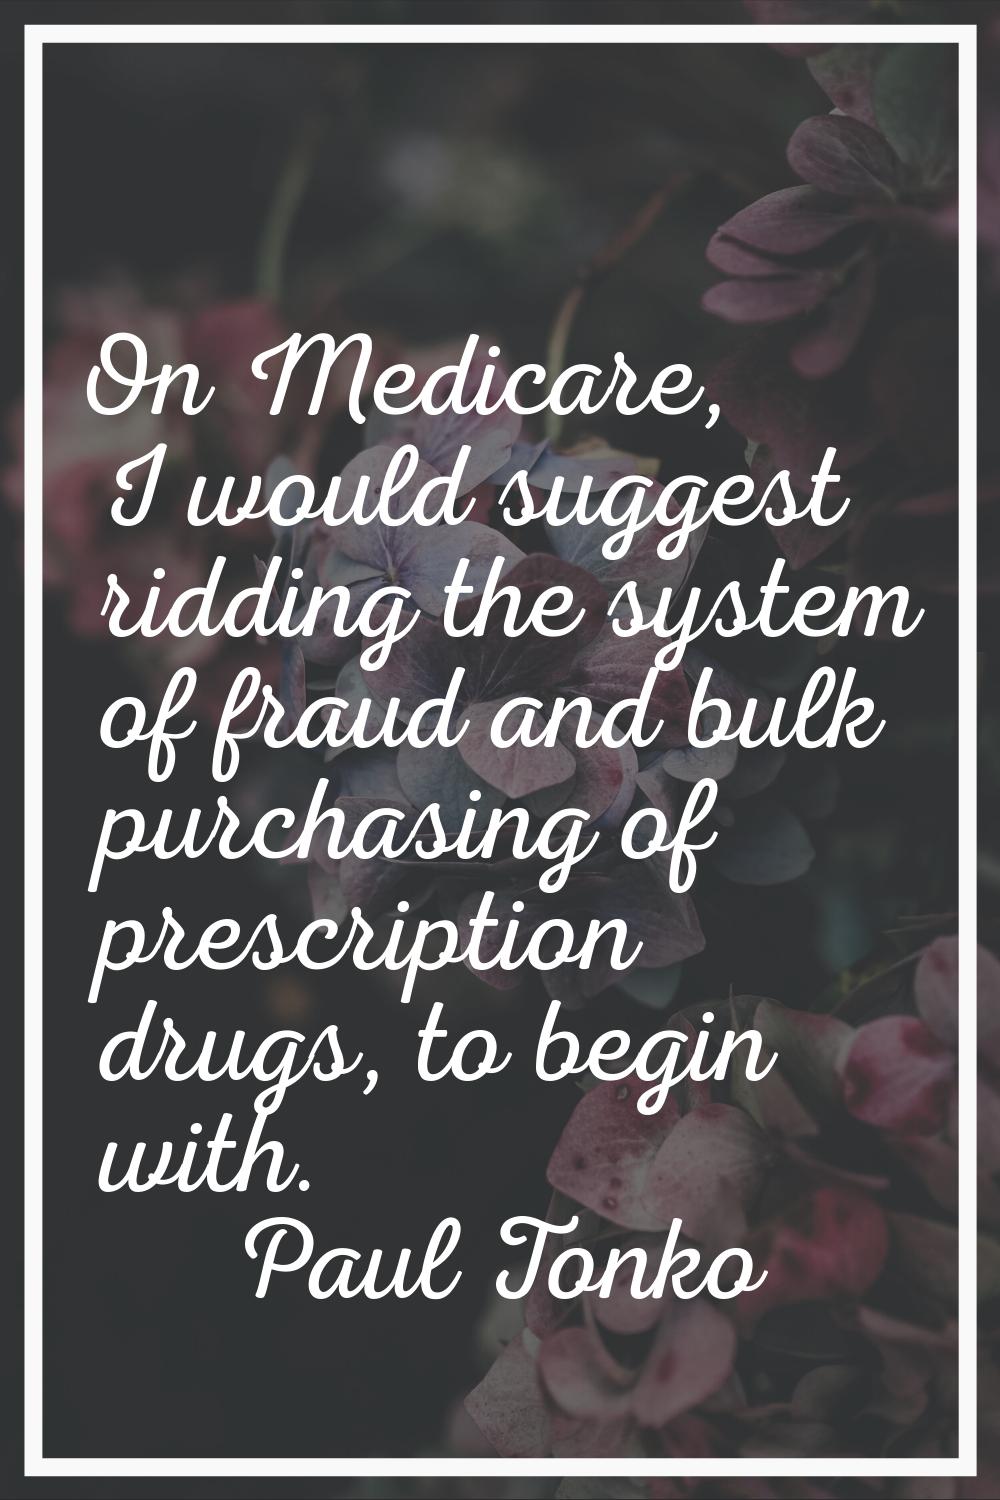 On Medicare, I would suggest ridding the system of fraud and bulk purchasing of prescription drugs,